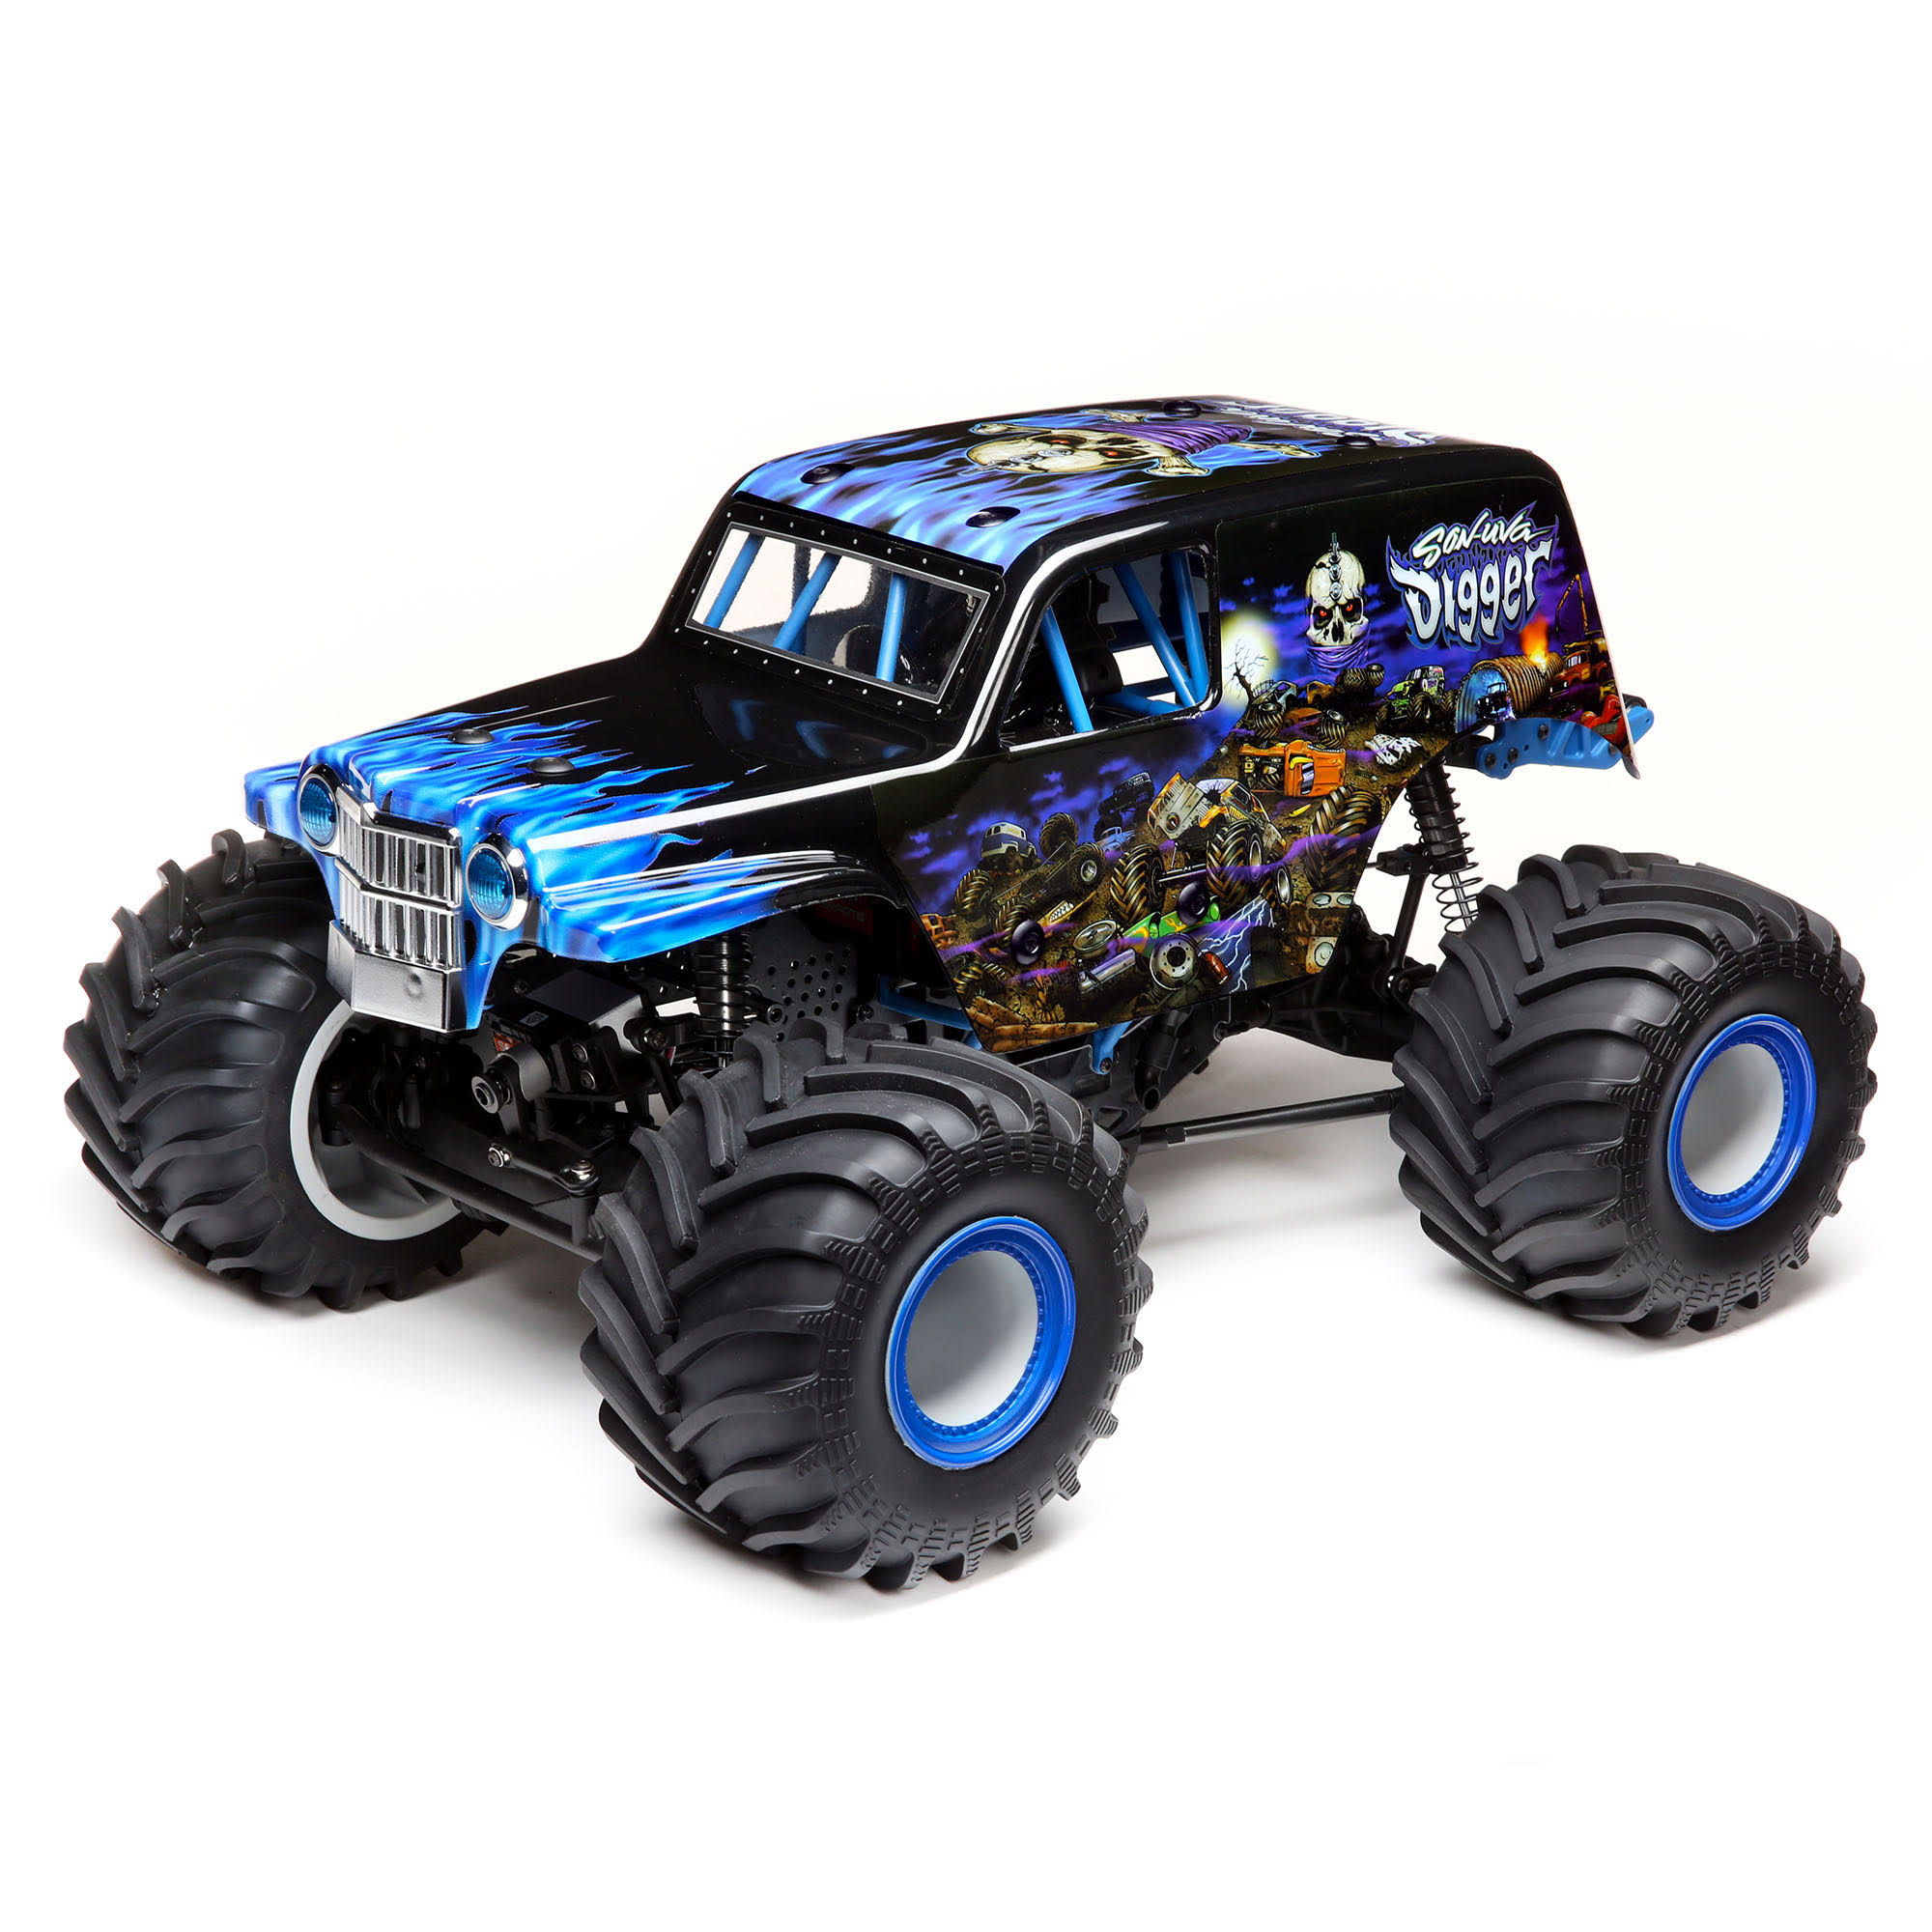 Losi LMT 4WD Solid Axle Monster Truck RTR, Son-uva Digger LOS04021T2